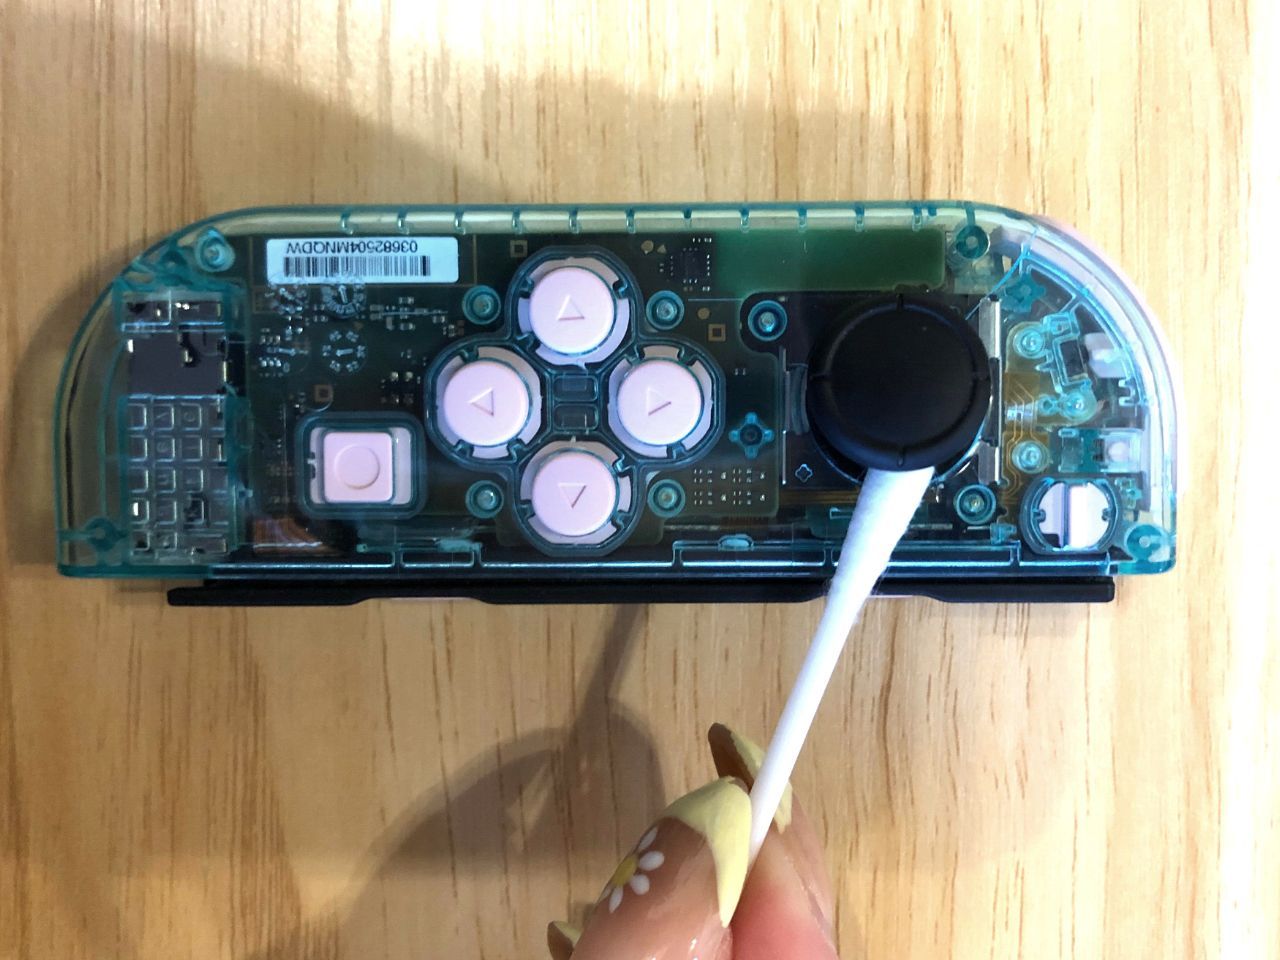 Using a cotton swab to clean under the Joy Con analog stick